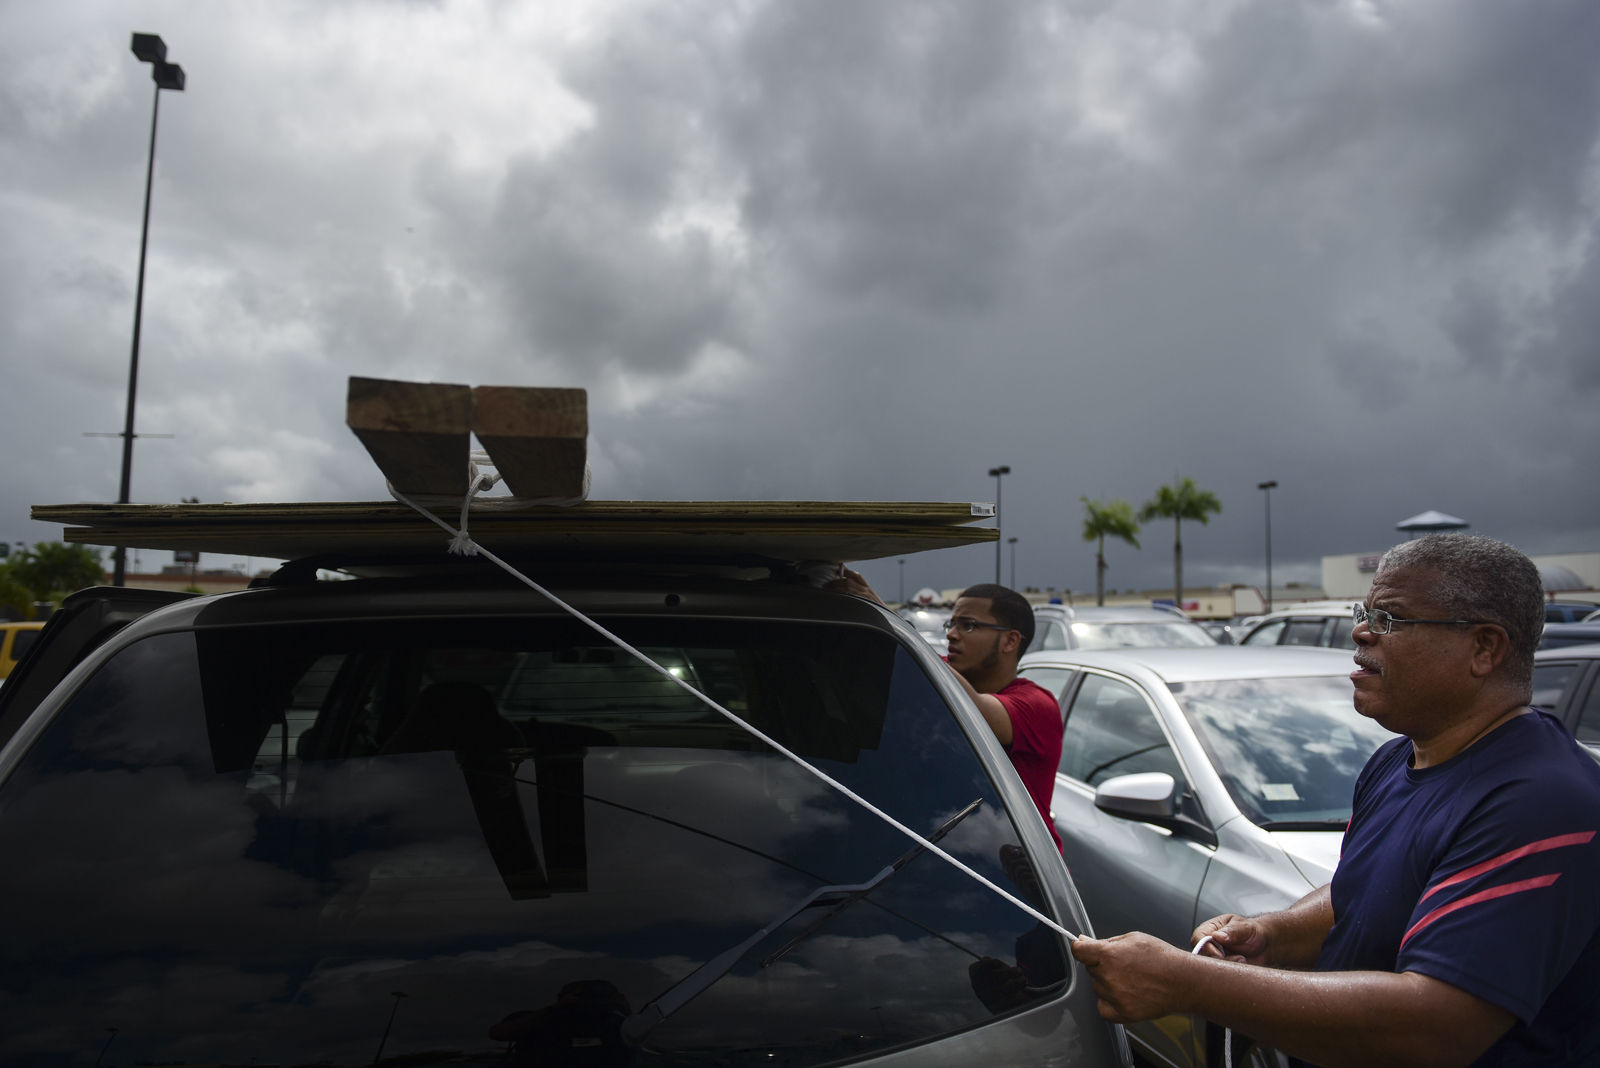 Men tie down wood panels to be used for boarding up windows in preparation for Hurricane Irma, in Carolina, Puerto Rico, Tuesday, Sept. 5, 2017. Irma grew into a dangerous Category 5 storm, the most powerful seen in the Atlantic in over a decade, and roared toward islands in the northeast Caribbean Tuesday. (AP Photo/Carlos Giusti)